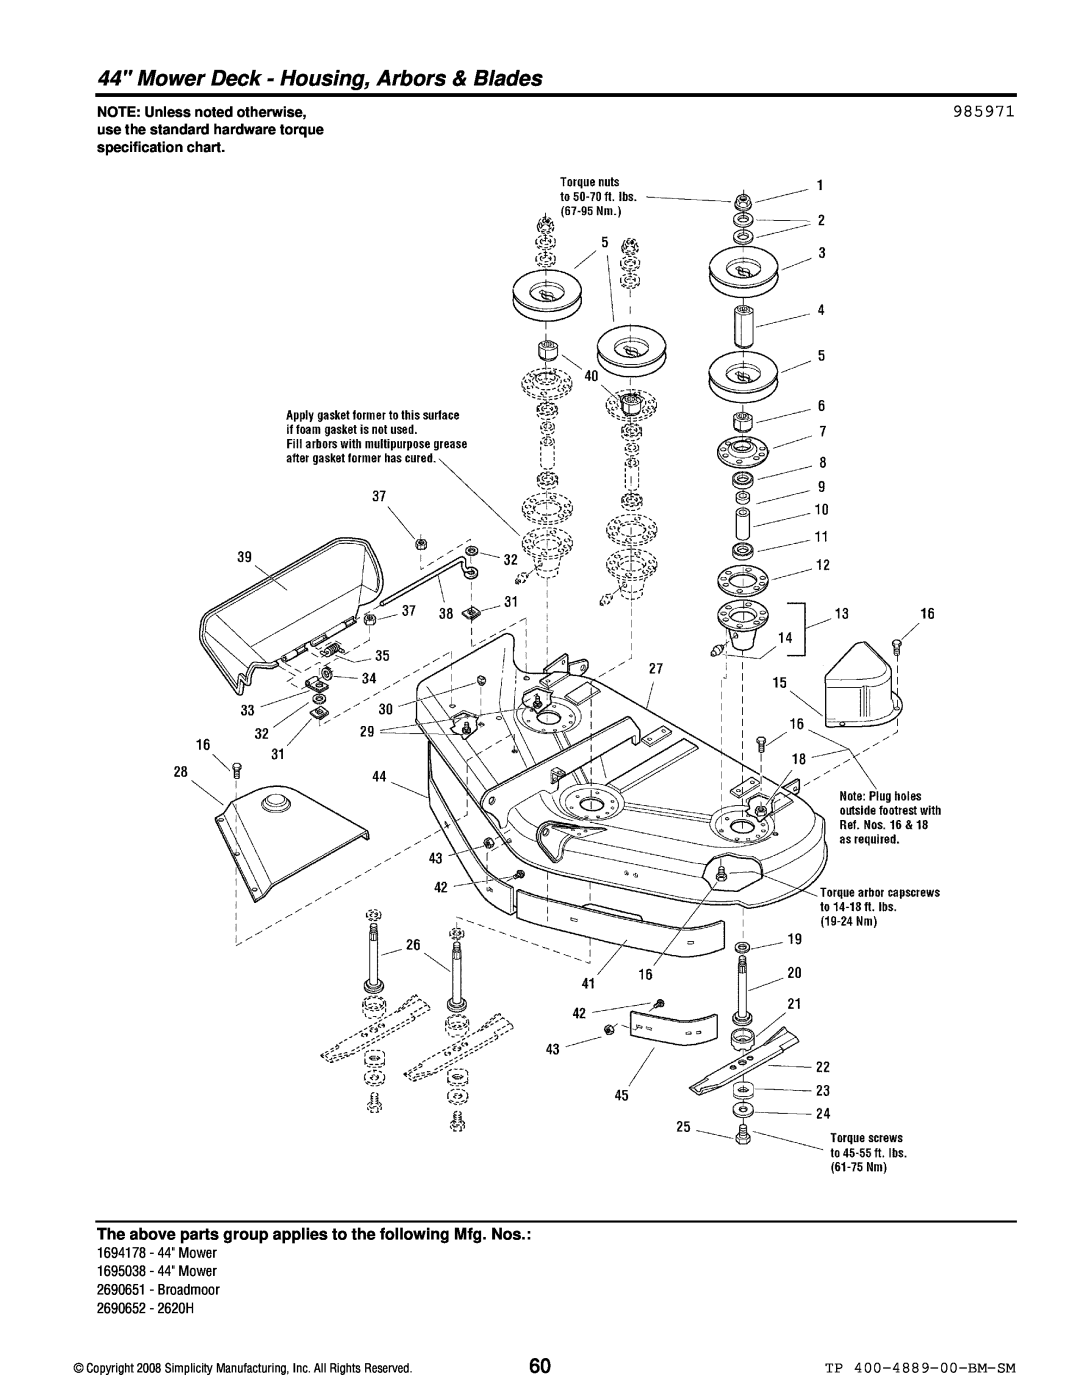 Simplicity 2600 Series Mower Deck - Housing, Arbors & Blades, 985971, TP 400-4889-00-BM-SM, NOTE: Unless noted otherwise 